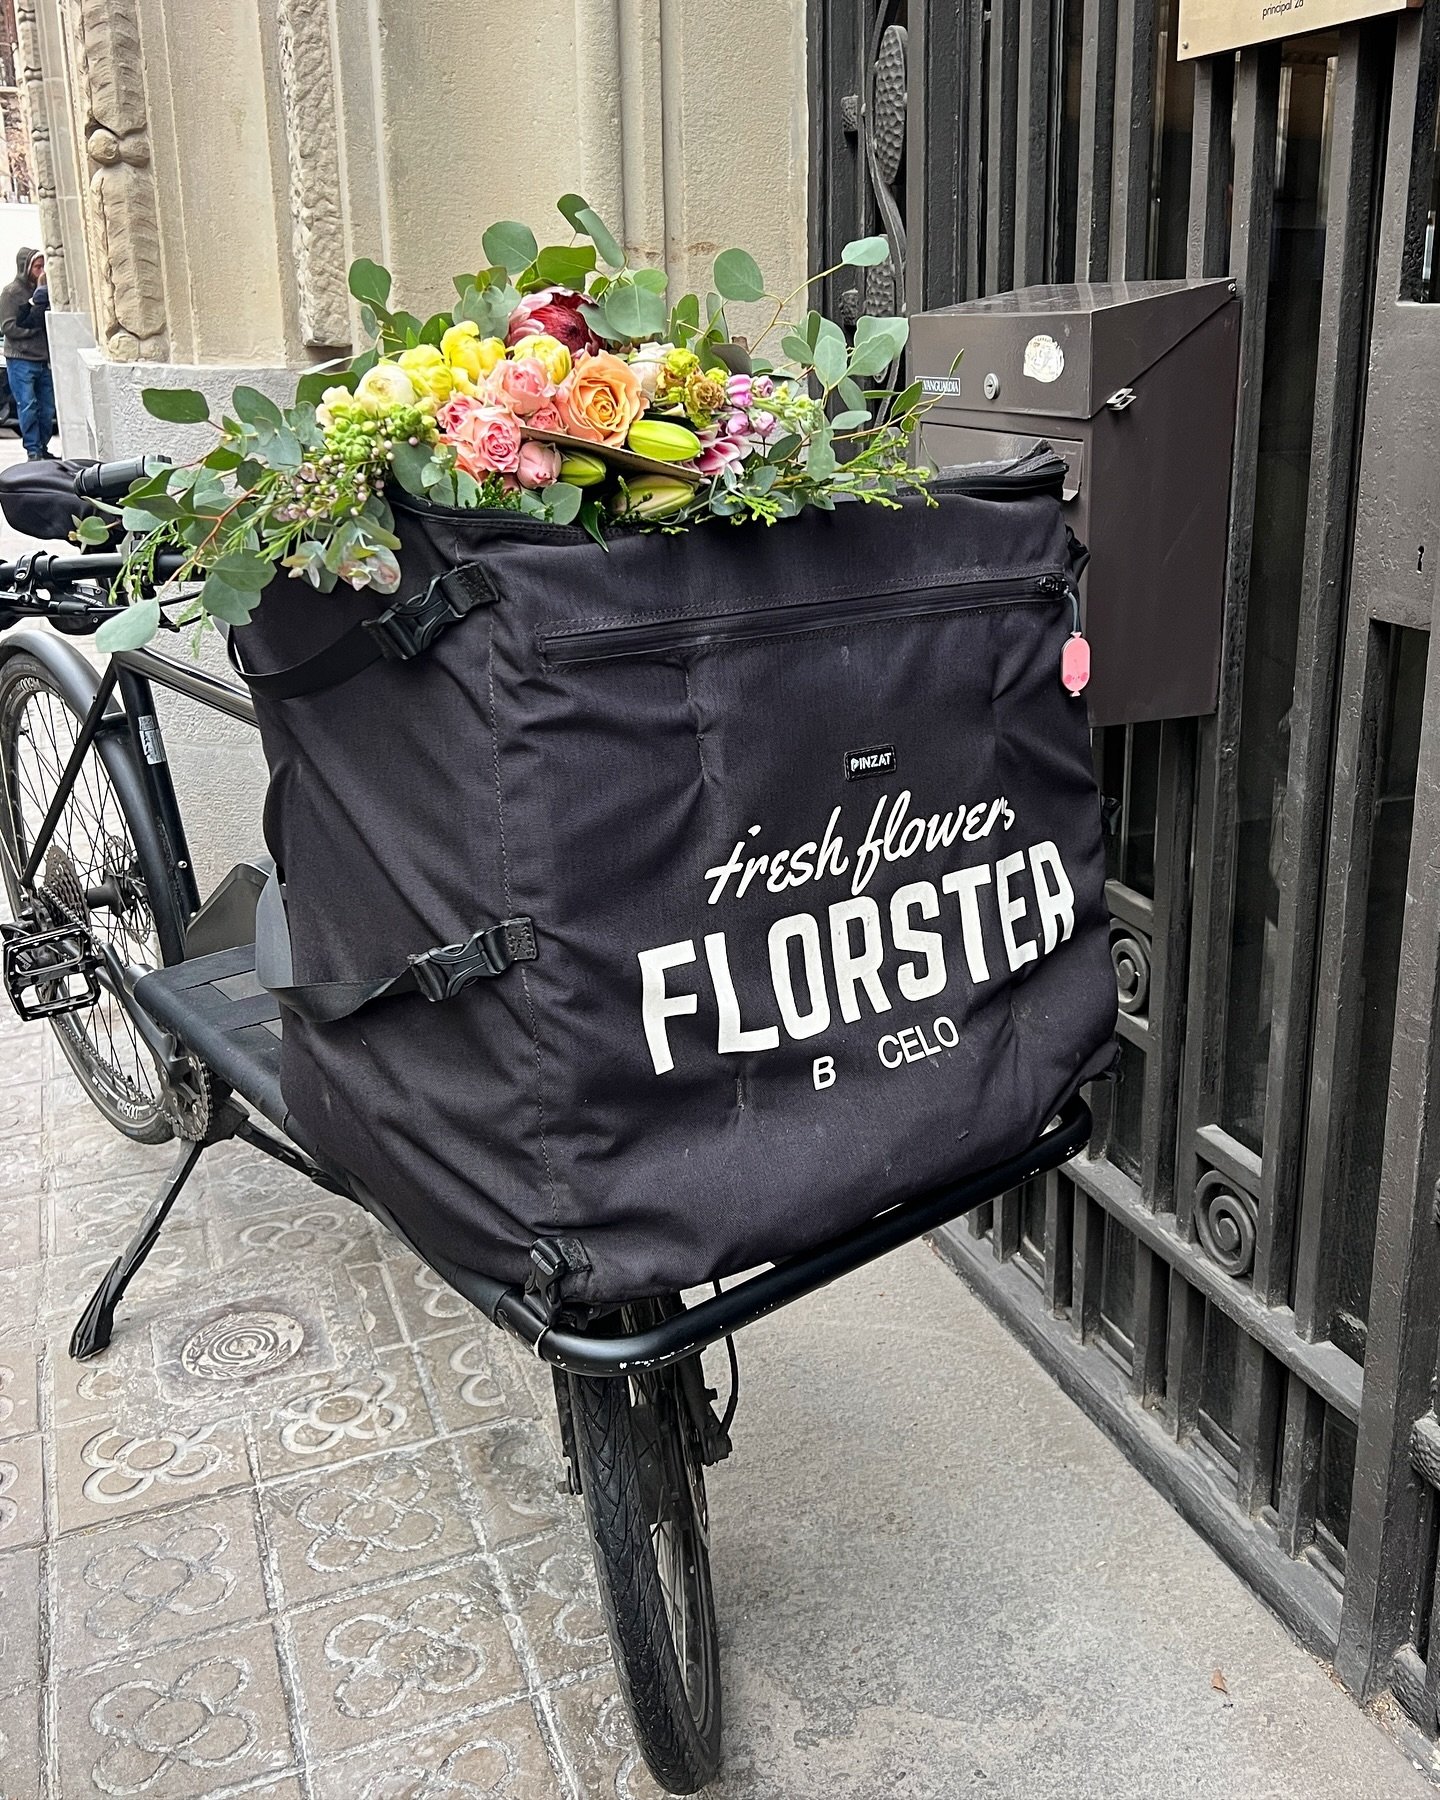 What's better than flowers? Surprise flowers, delivered by bicycle. 

Happy #flowerfriday!!

#designlife #flowerpower #bloombloombloom #pursuepretty #everydaybeautiful